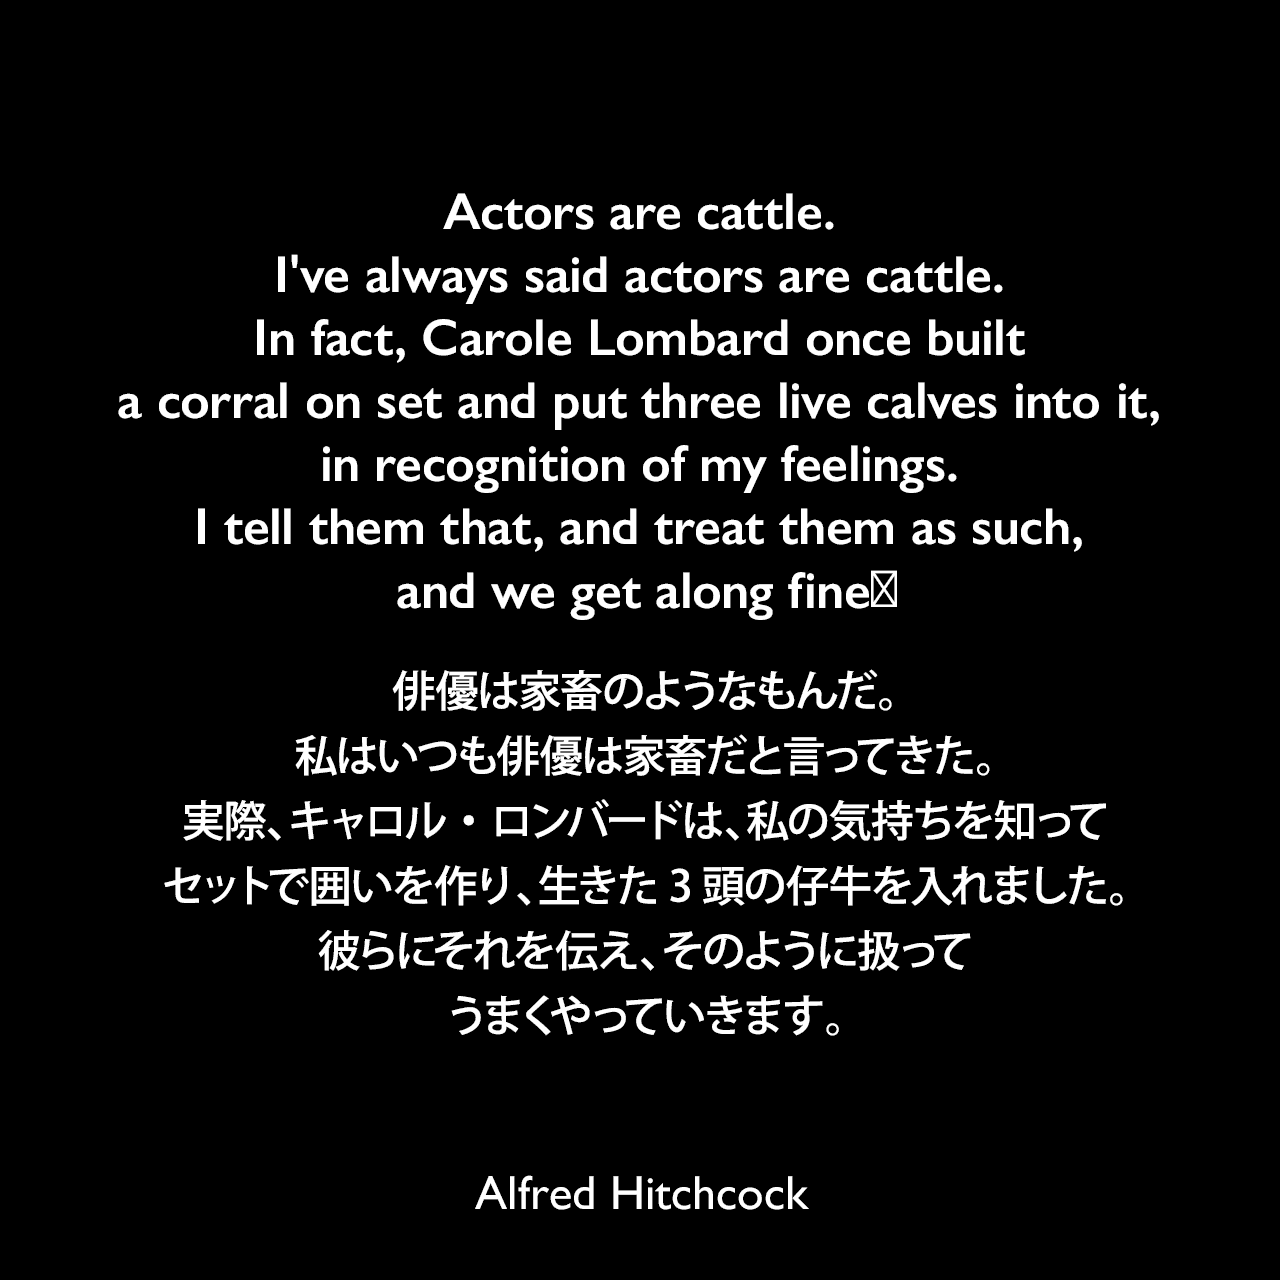 Actors are cattle. I've always said actors are cattle. In fact, Carole Lombard once built a corral on set and put three live calves into it, in recognition of my feelings. I tell them that, and treat them as such, and we get along fineǃ俳優は家畜のようなもんだ。私はいつも俳優は家畜だと言ってきた。実際、キャロル・ロンバードは、私の気持ちを知って、セットで囲いを作り、生きた3頭の仔牛を入れました。彼らにそれを伝え、そのように扱って、うまくやっていきます。- ニューヨーク・ヘラルド・トリビューン誌の「New York Close-Up」よりAlfred Hitchcock